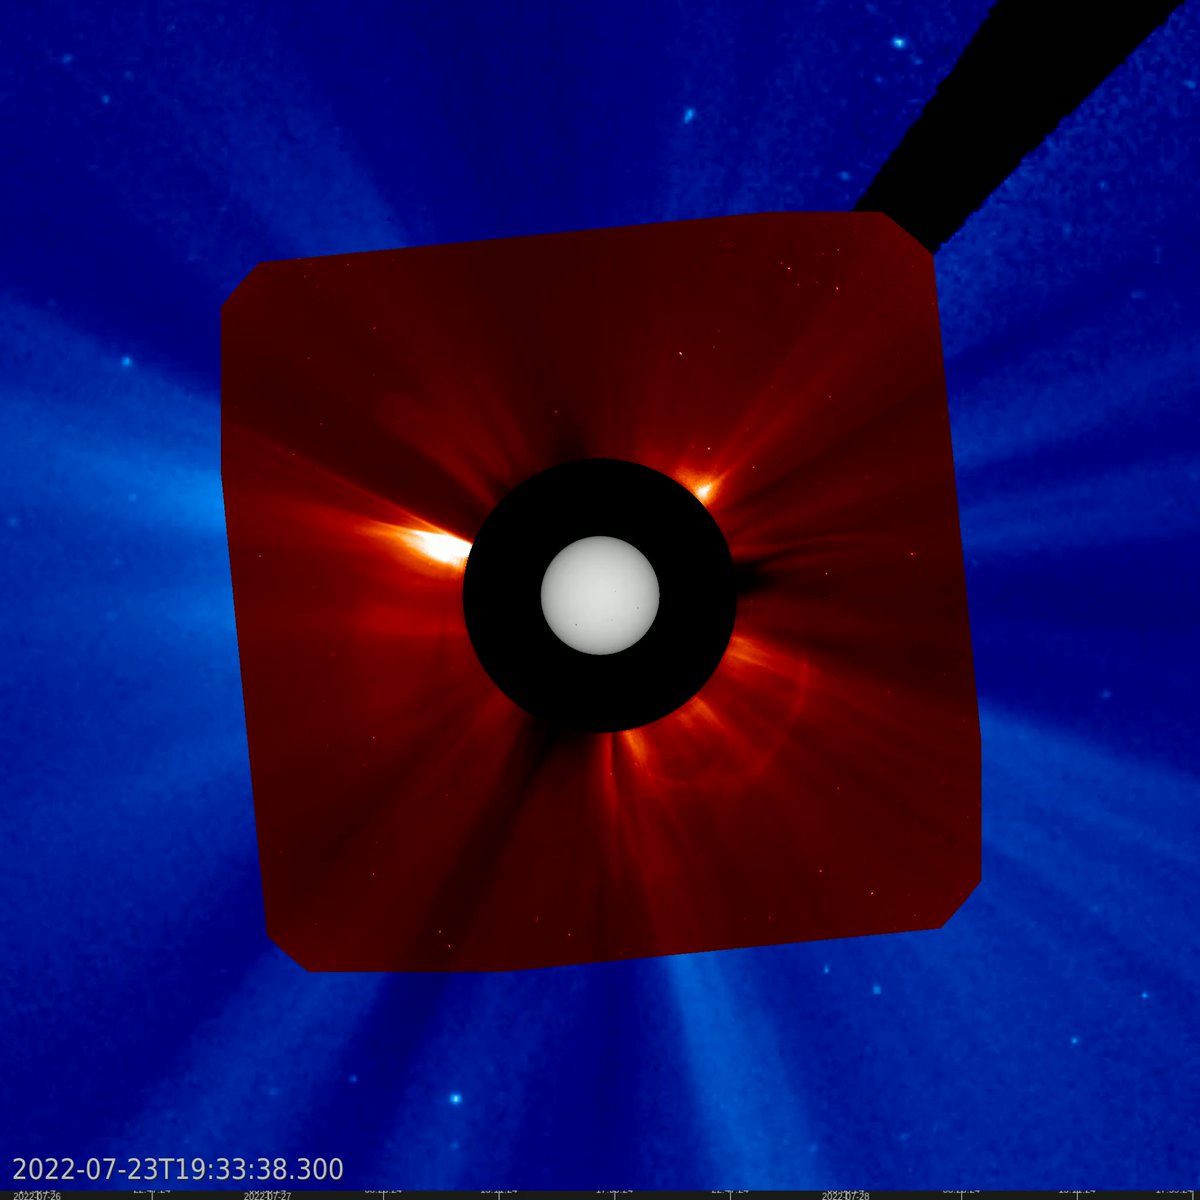 Sun’s ‘Cannibal Coronal Mass Ejections’ to trigger geomagnetic storms on August 18